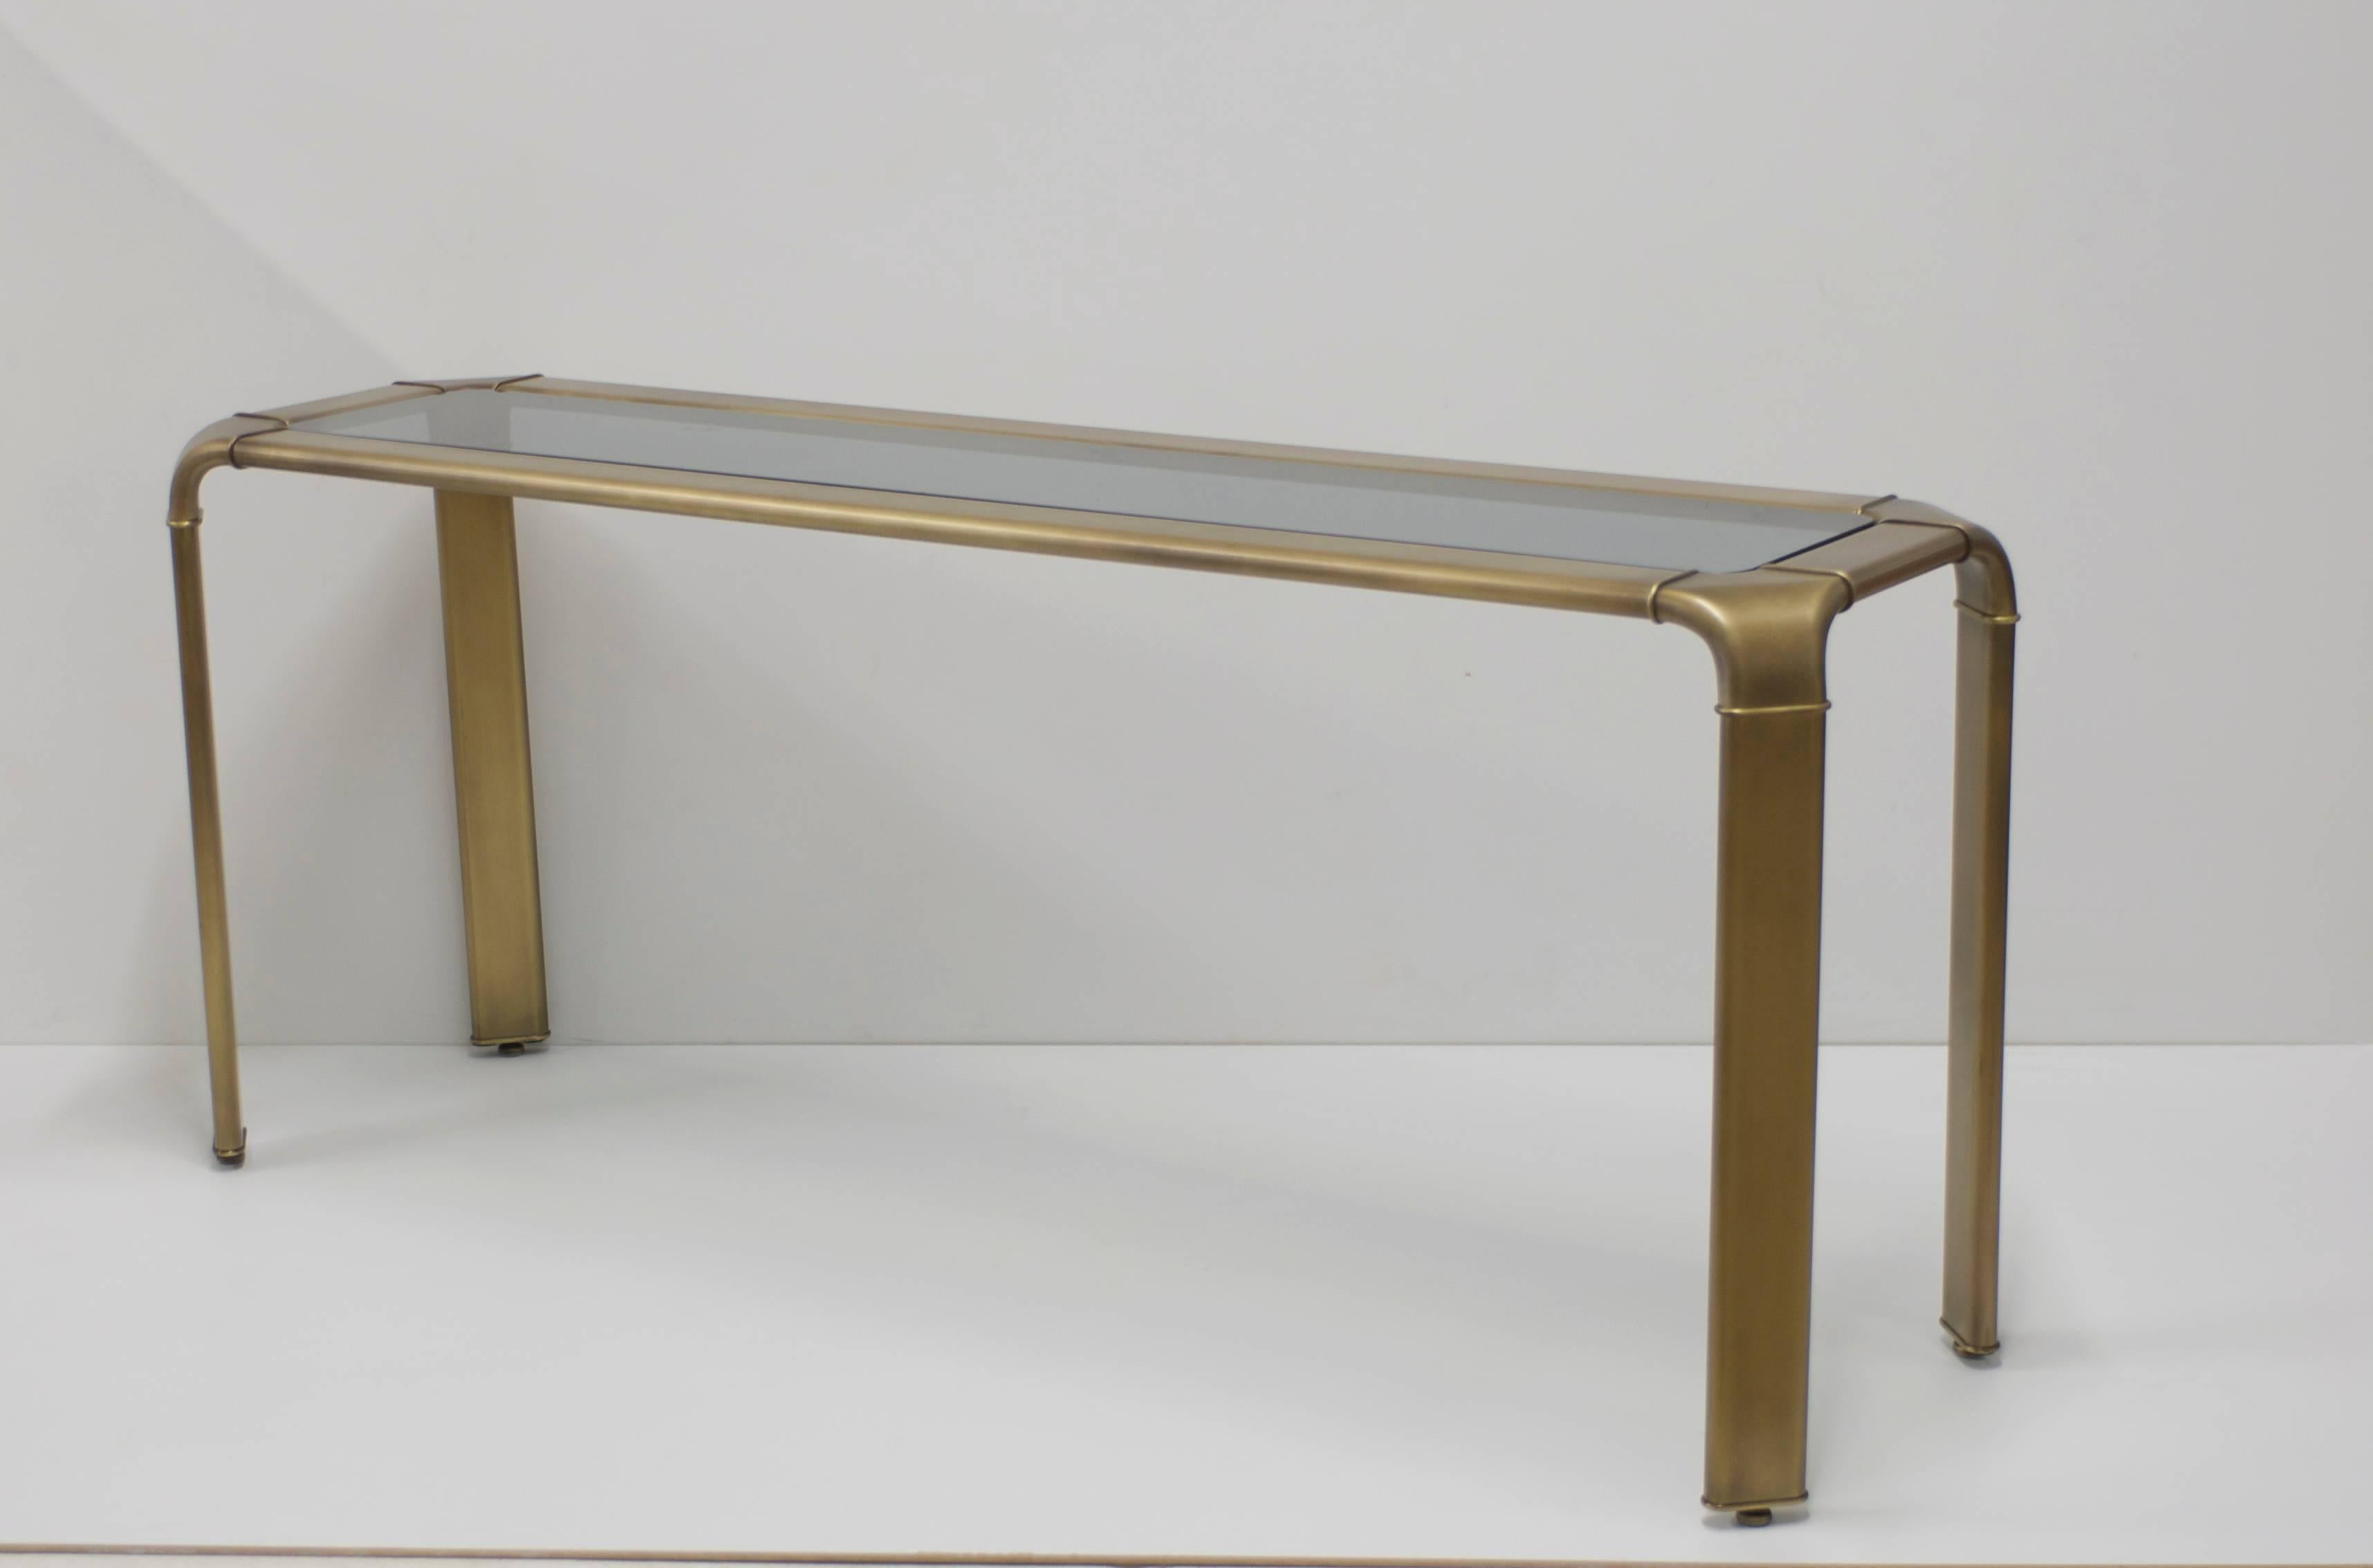 20th Century John Widdicomb Burnished Brass Console Table with Smoked Grey Glass